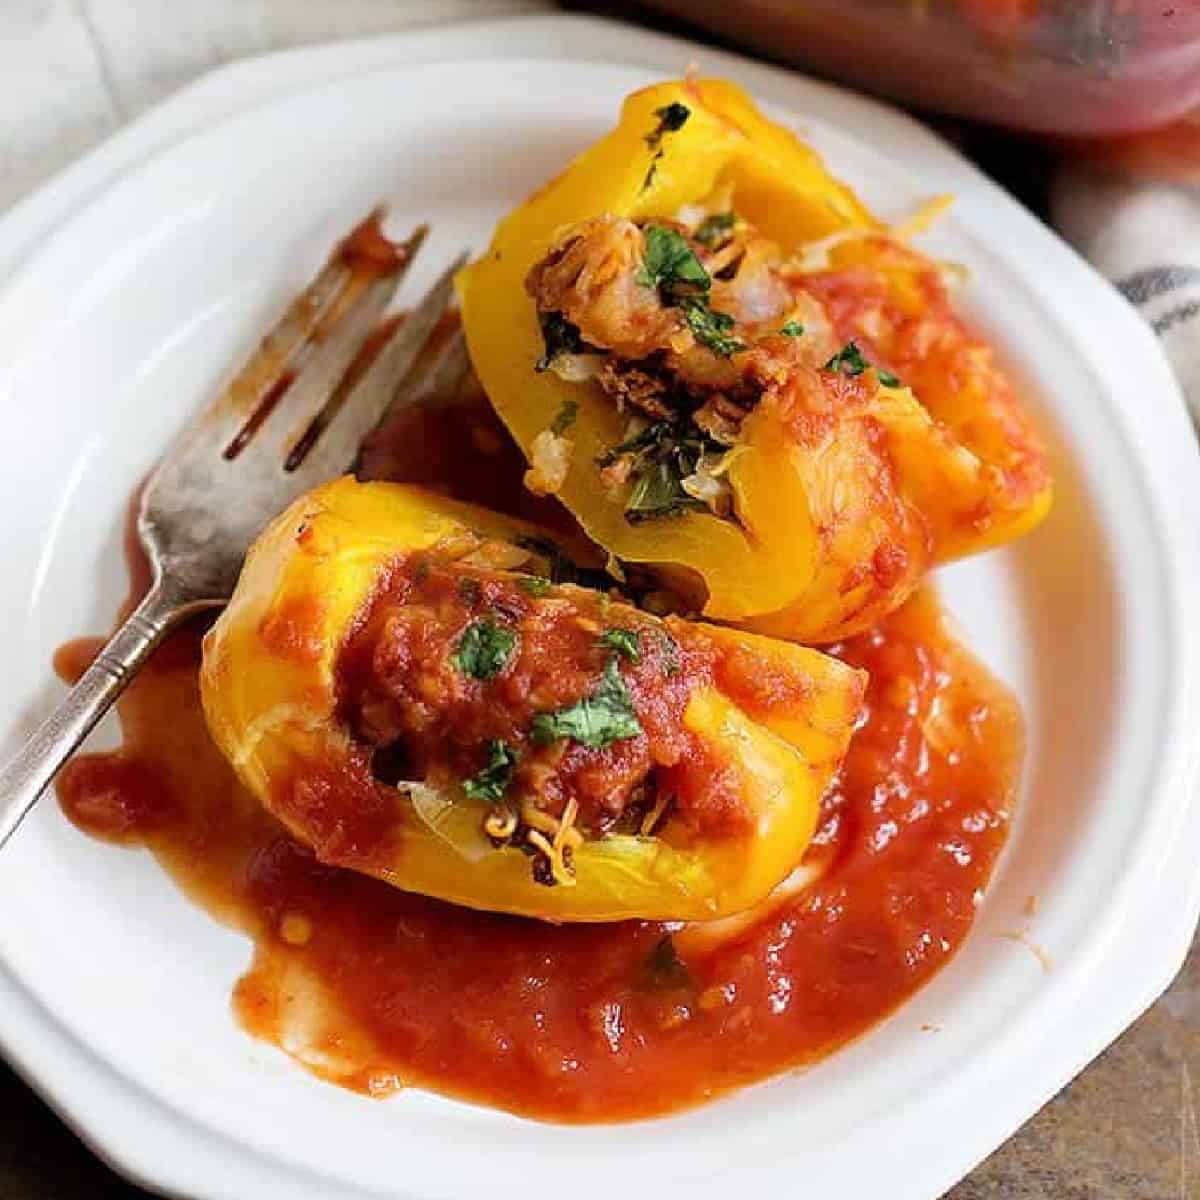 Mexican stuffed peppers are the perfect dinner. Colorful bell peppers are stuffed with delicious ground beef and rice filling that's bursting with flavor. 
